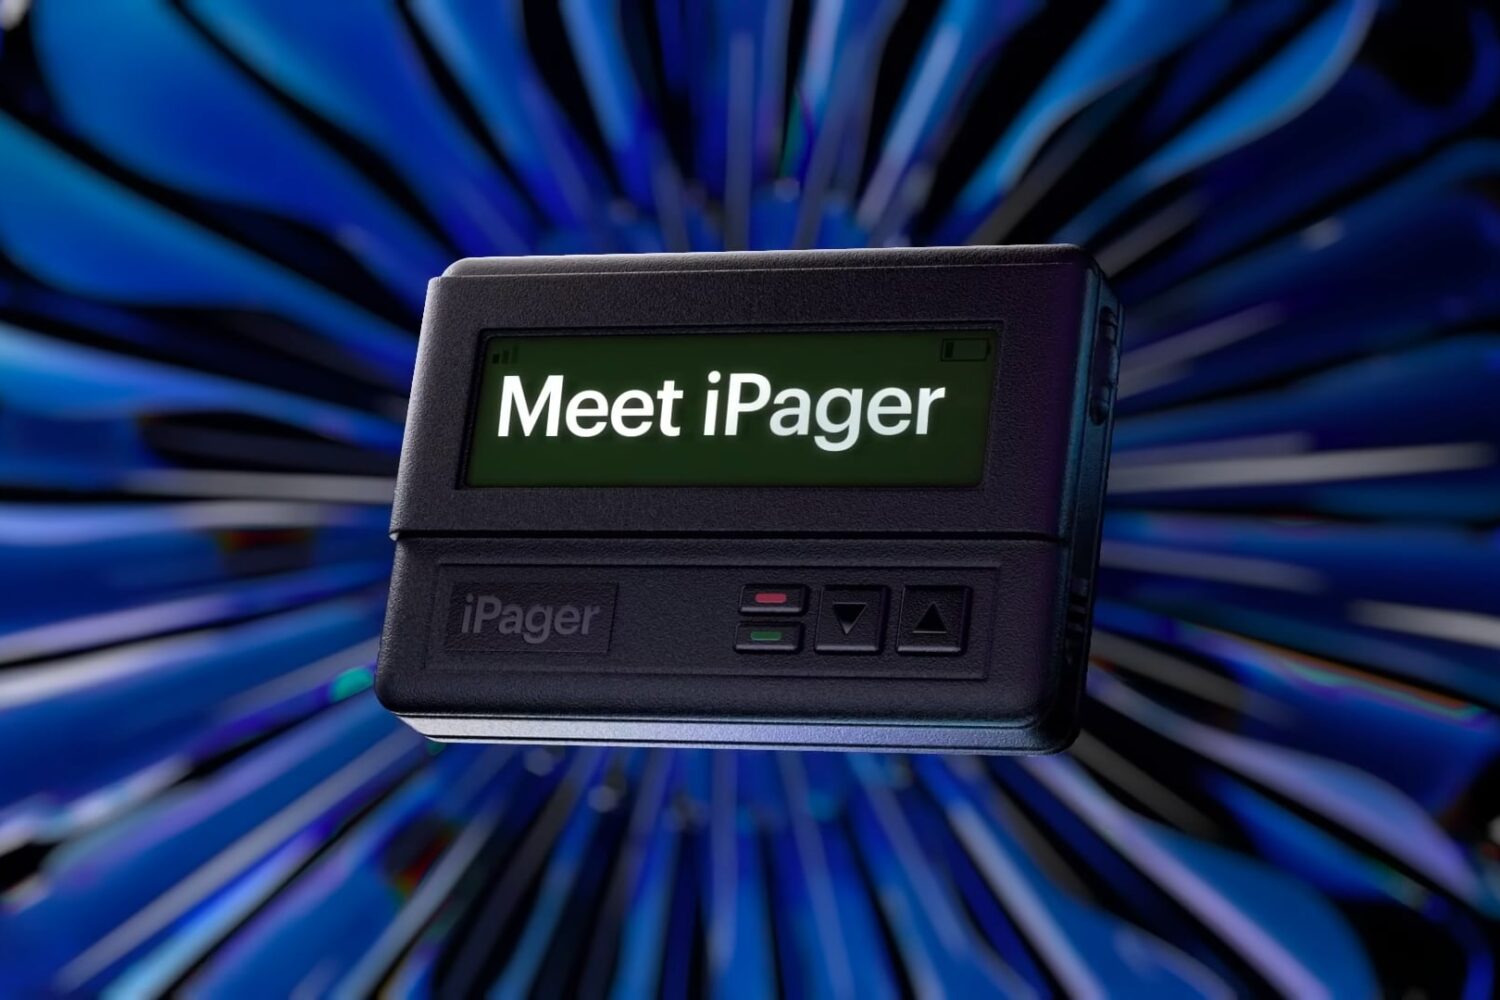 Scene from Google's RCS iMessage ad with a last-century pager-like device displaying the words "Meet iPager" on its crude dot-matrix display